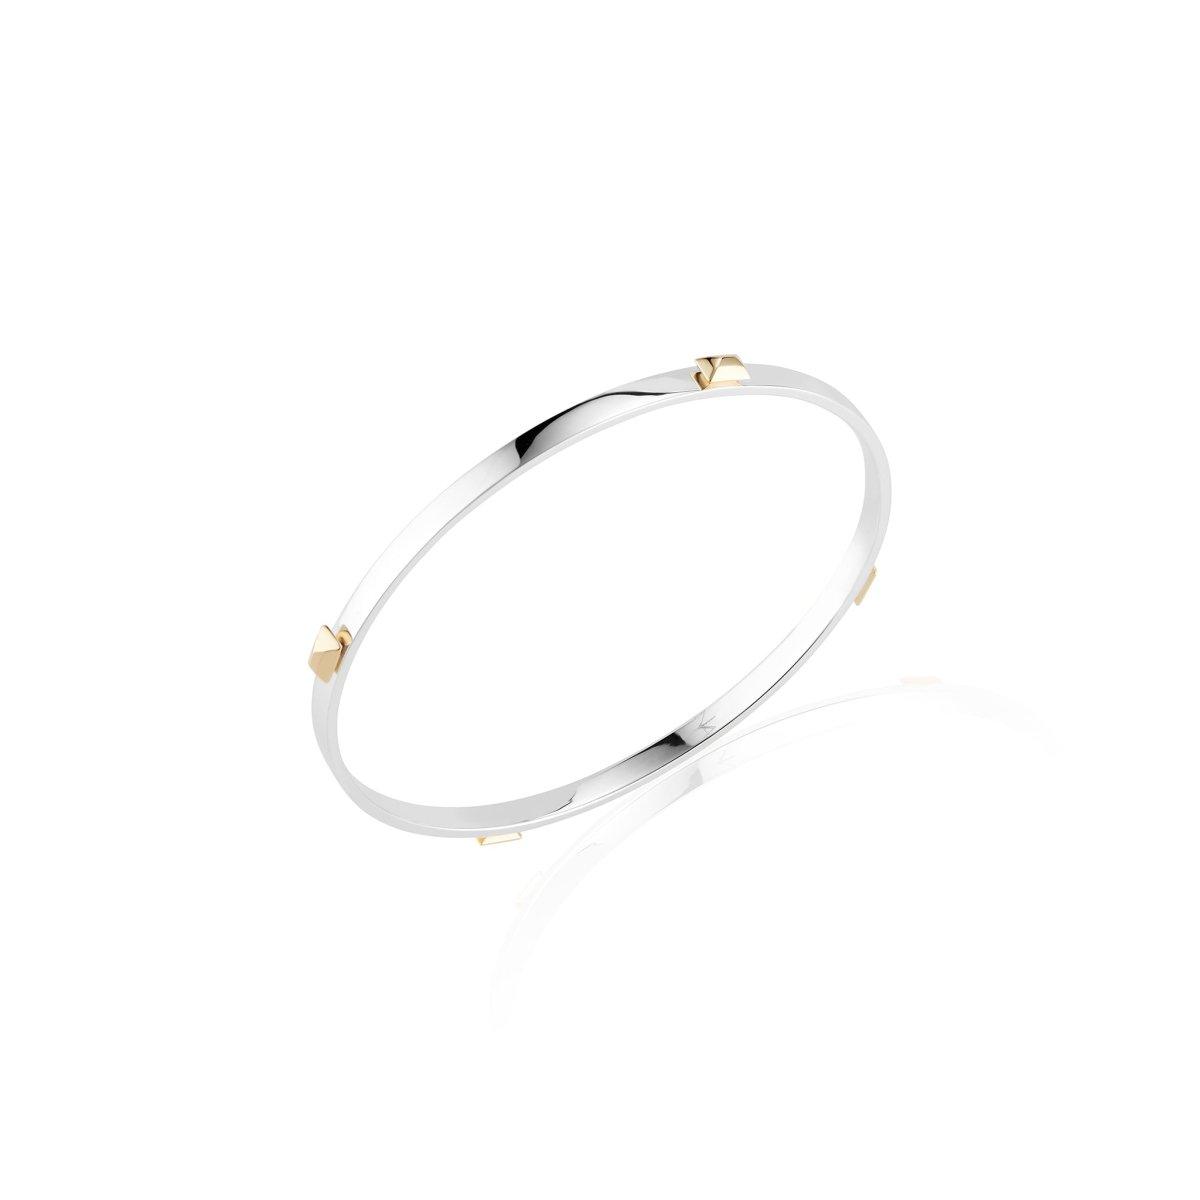 Sterling Silver and Gold Sparks Fly Bangle - Nataly Aponte